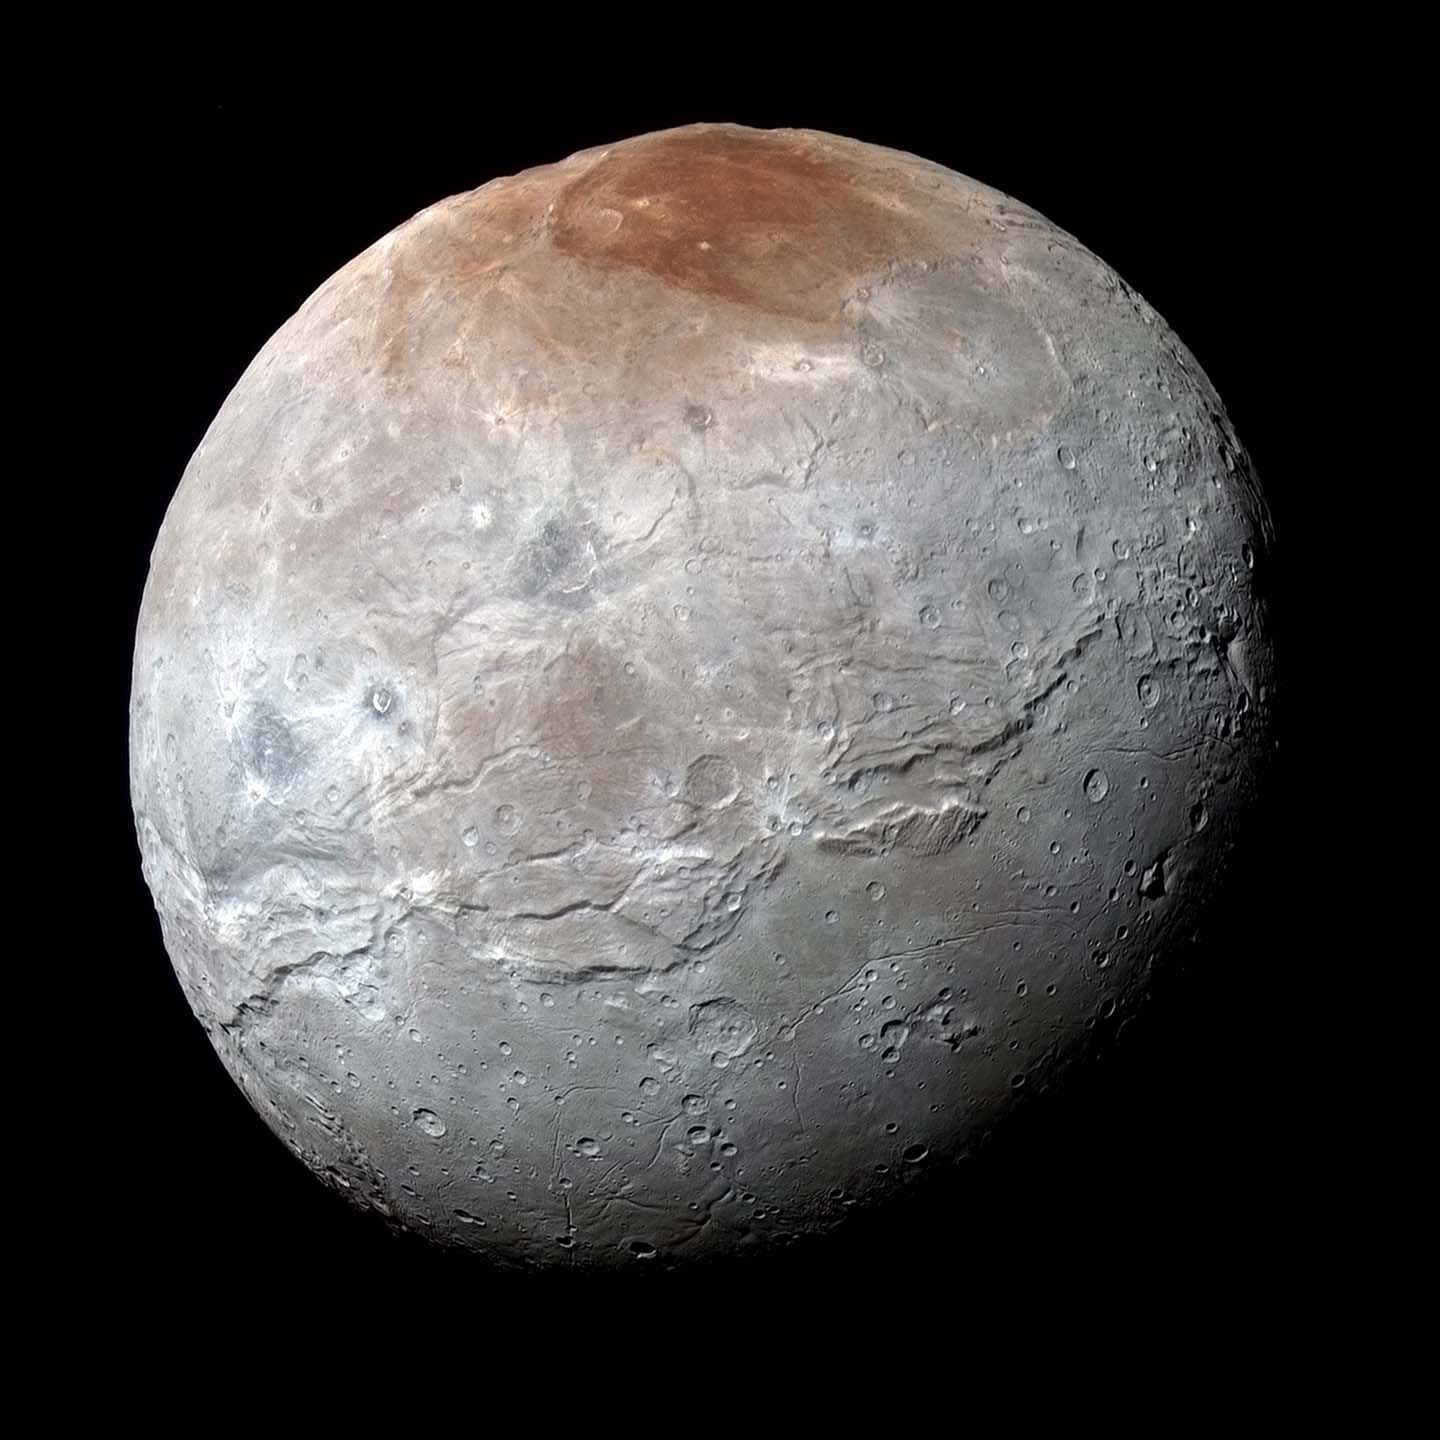 High-resolution enhanced color view of Charon, Pluto's largest moon